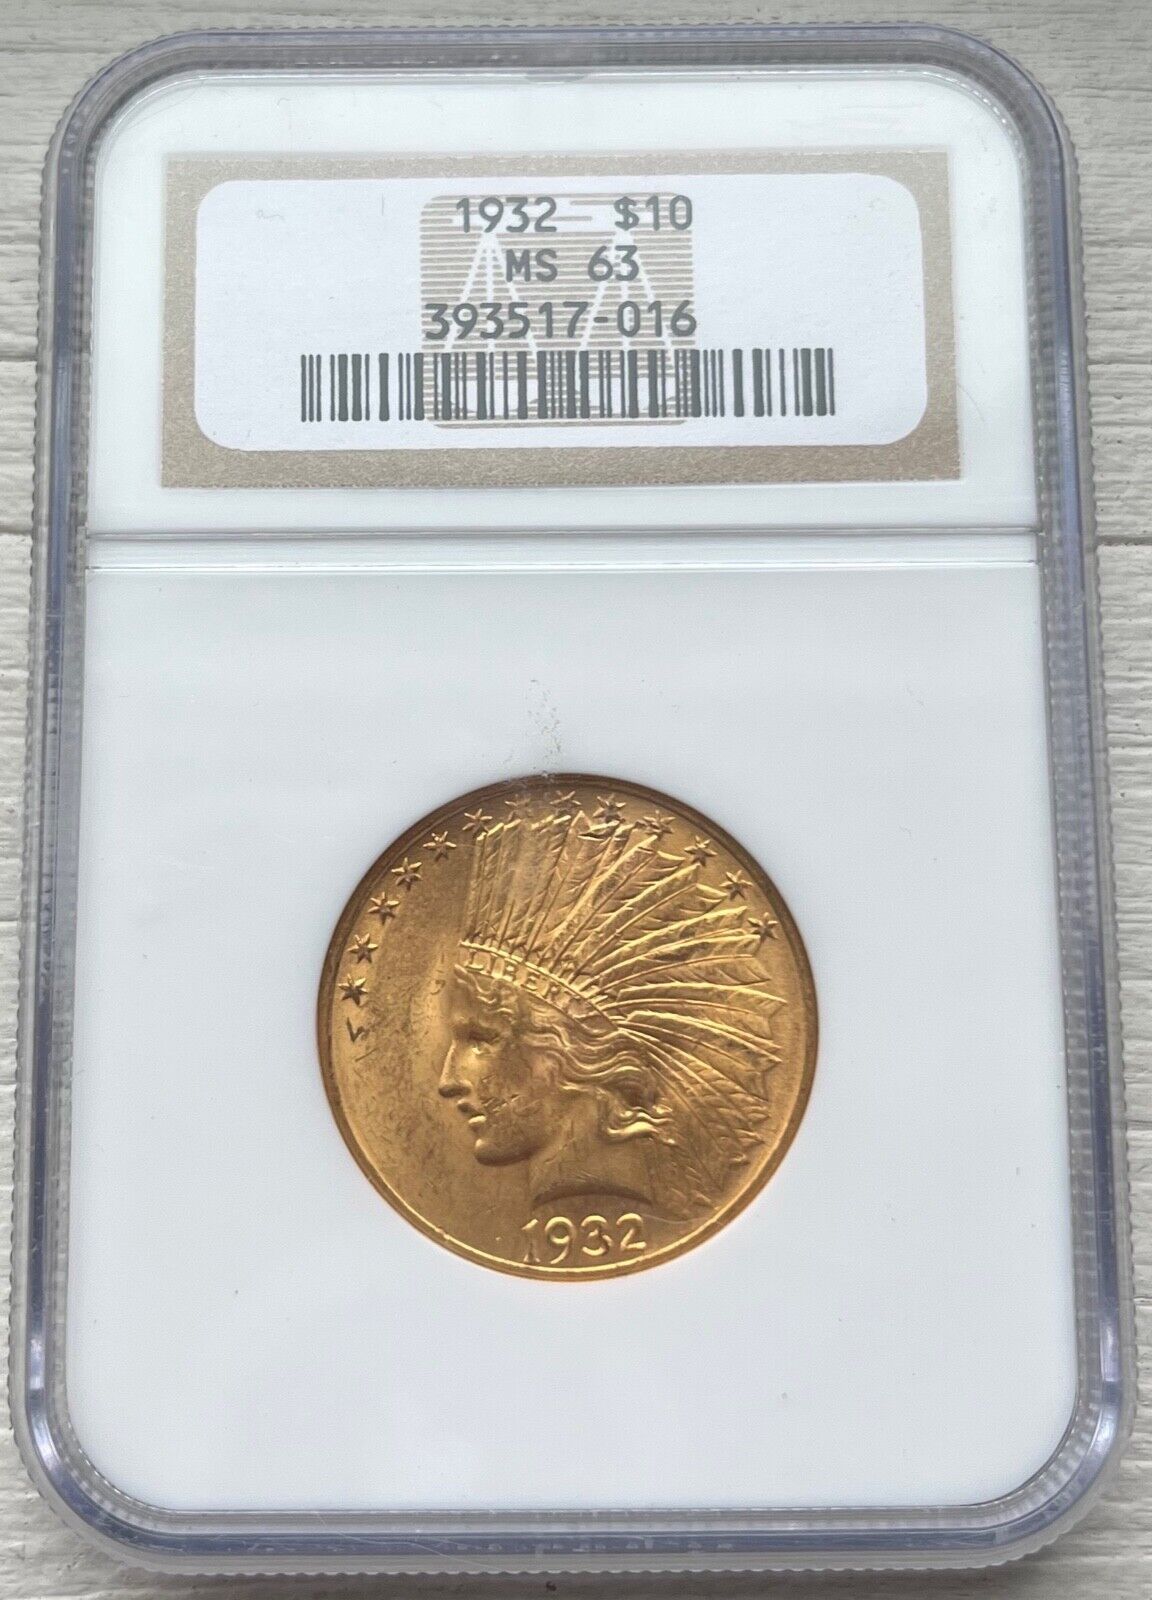 1932 $10 Ms-63 Ngc Certified Indian Head/eagle Us Gold Coin, Free Shipping